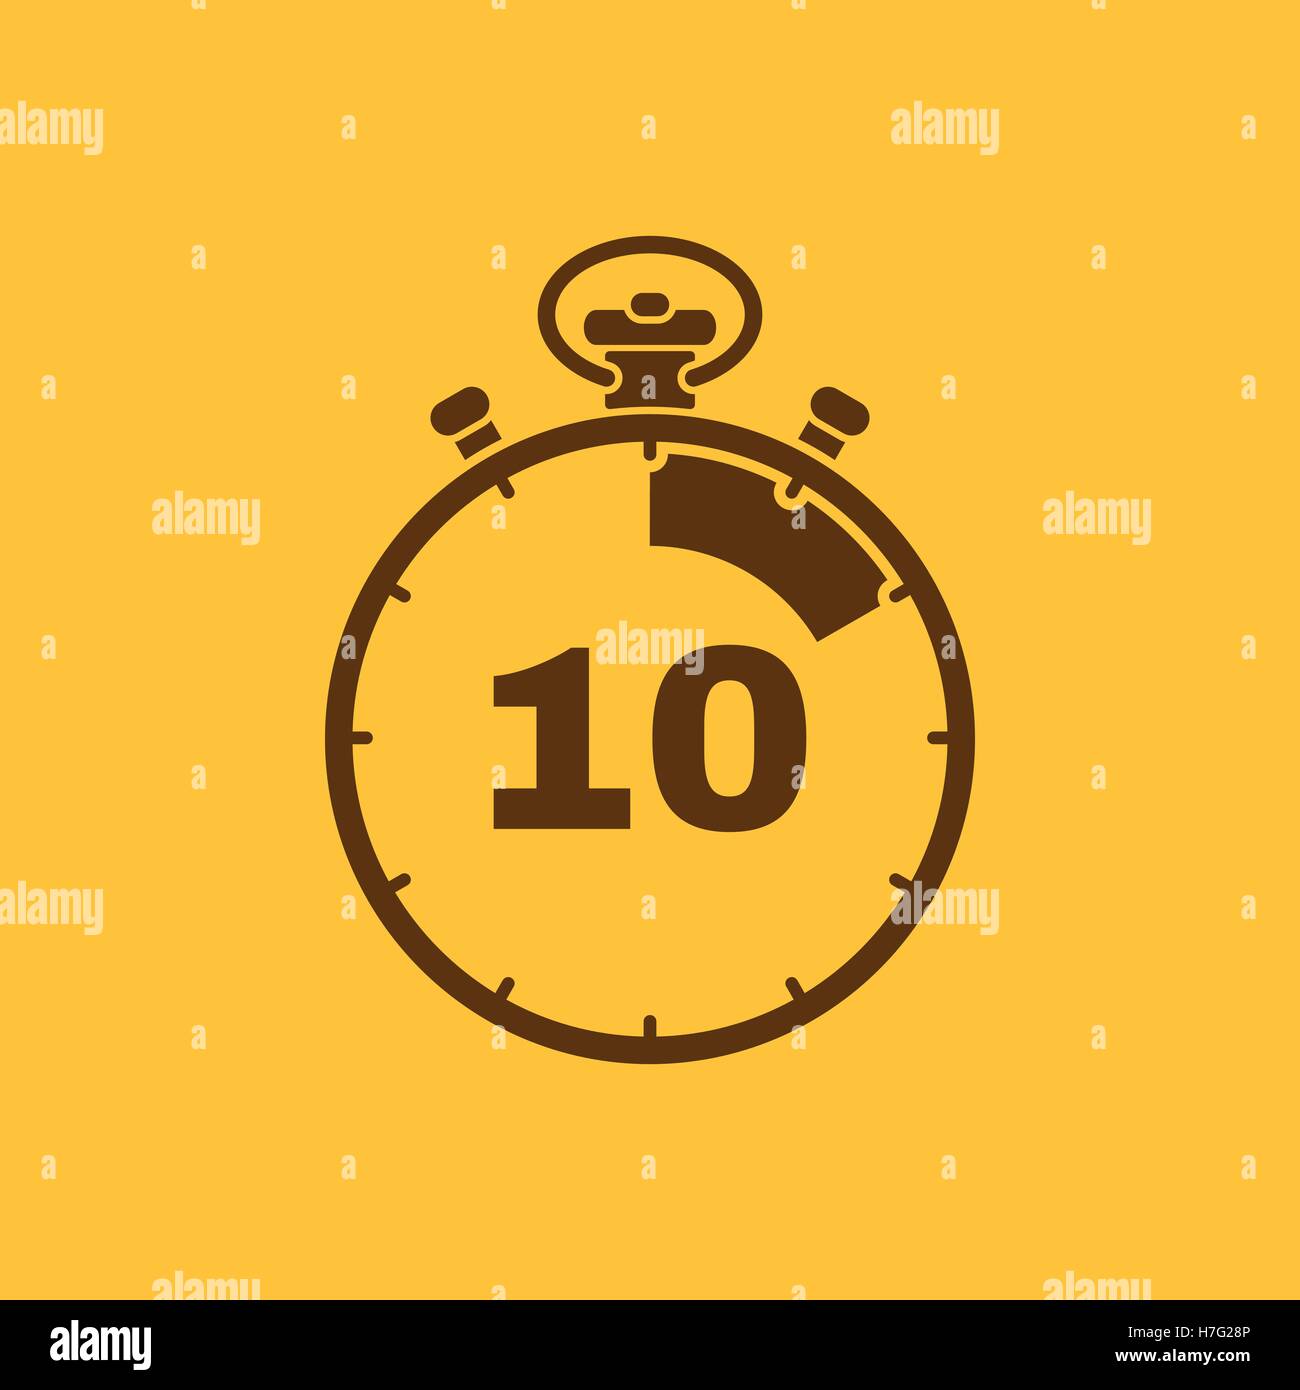 https://c8.alamy.com/comp/H7G28P/the-10-seconds-minutes-stopwatch-icon-clock-and-watch-timer-countdown-H7G28P.jpg